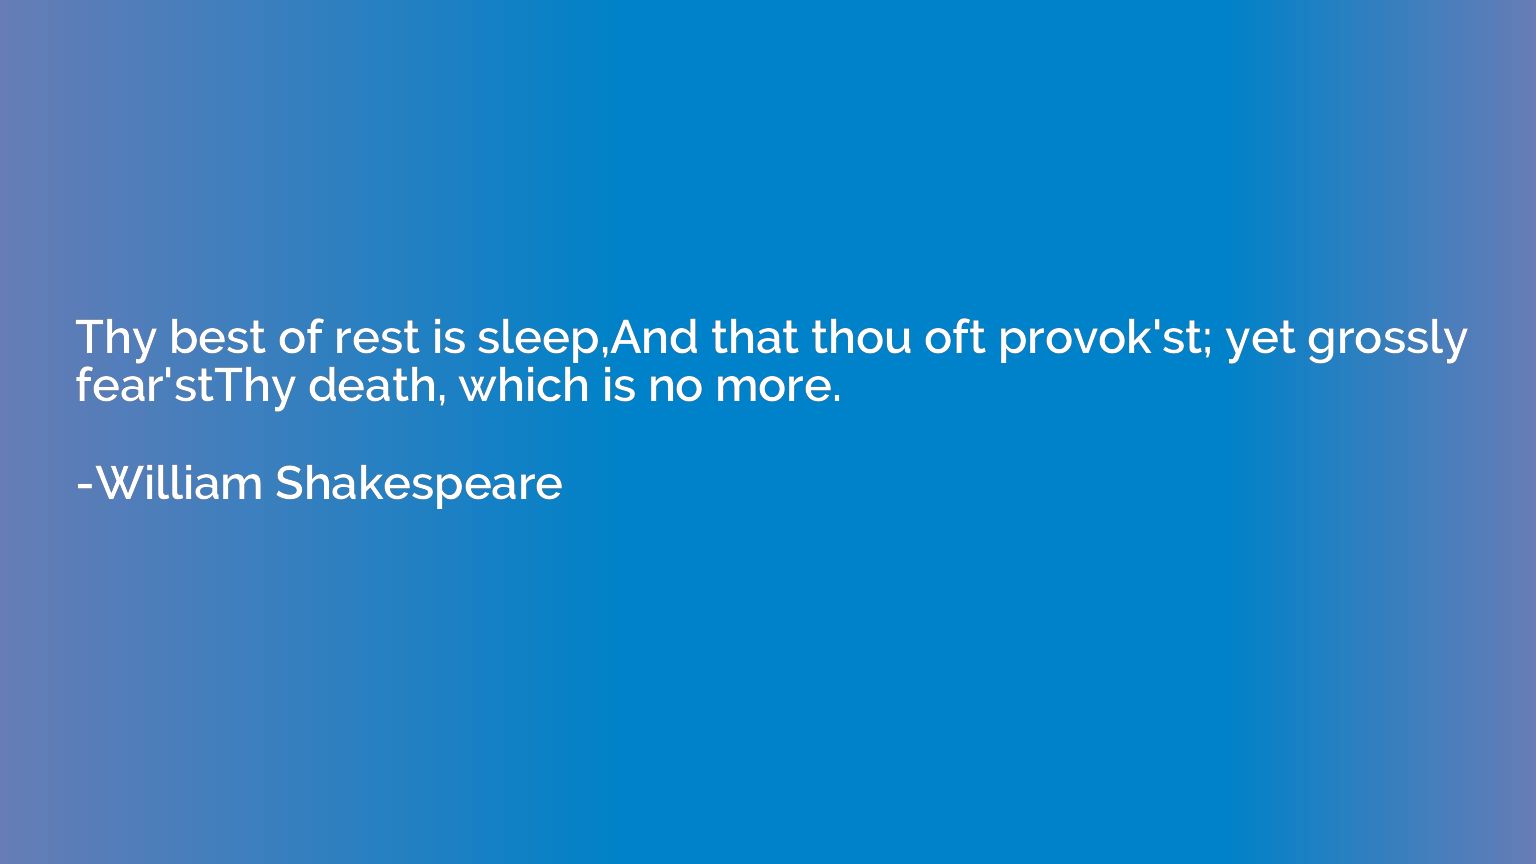 Thy best of rest is sleep,And that thou oft provok'st; yet g